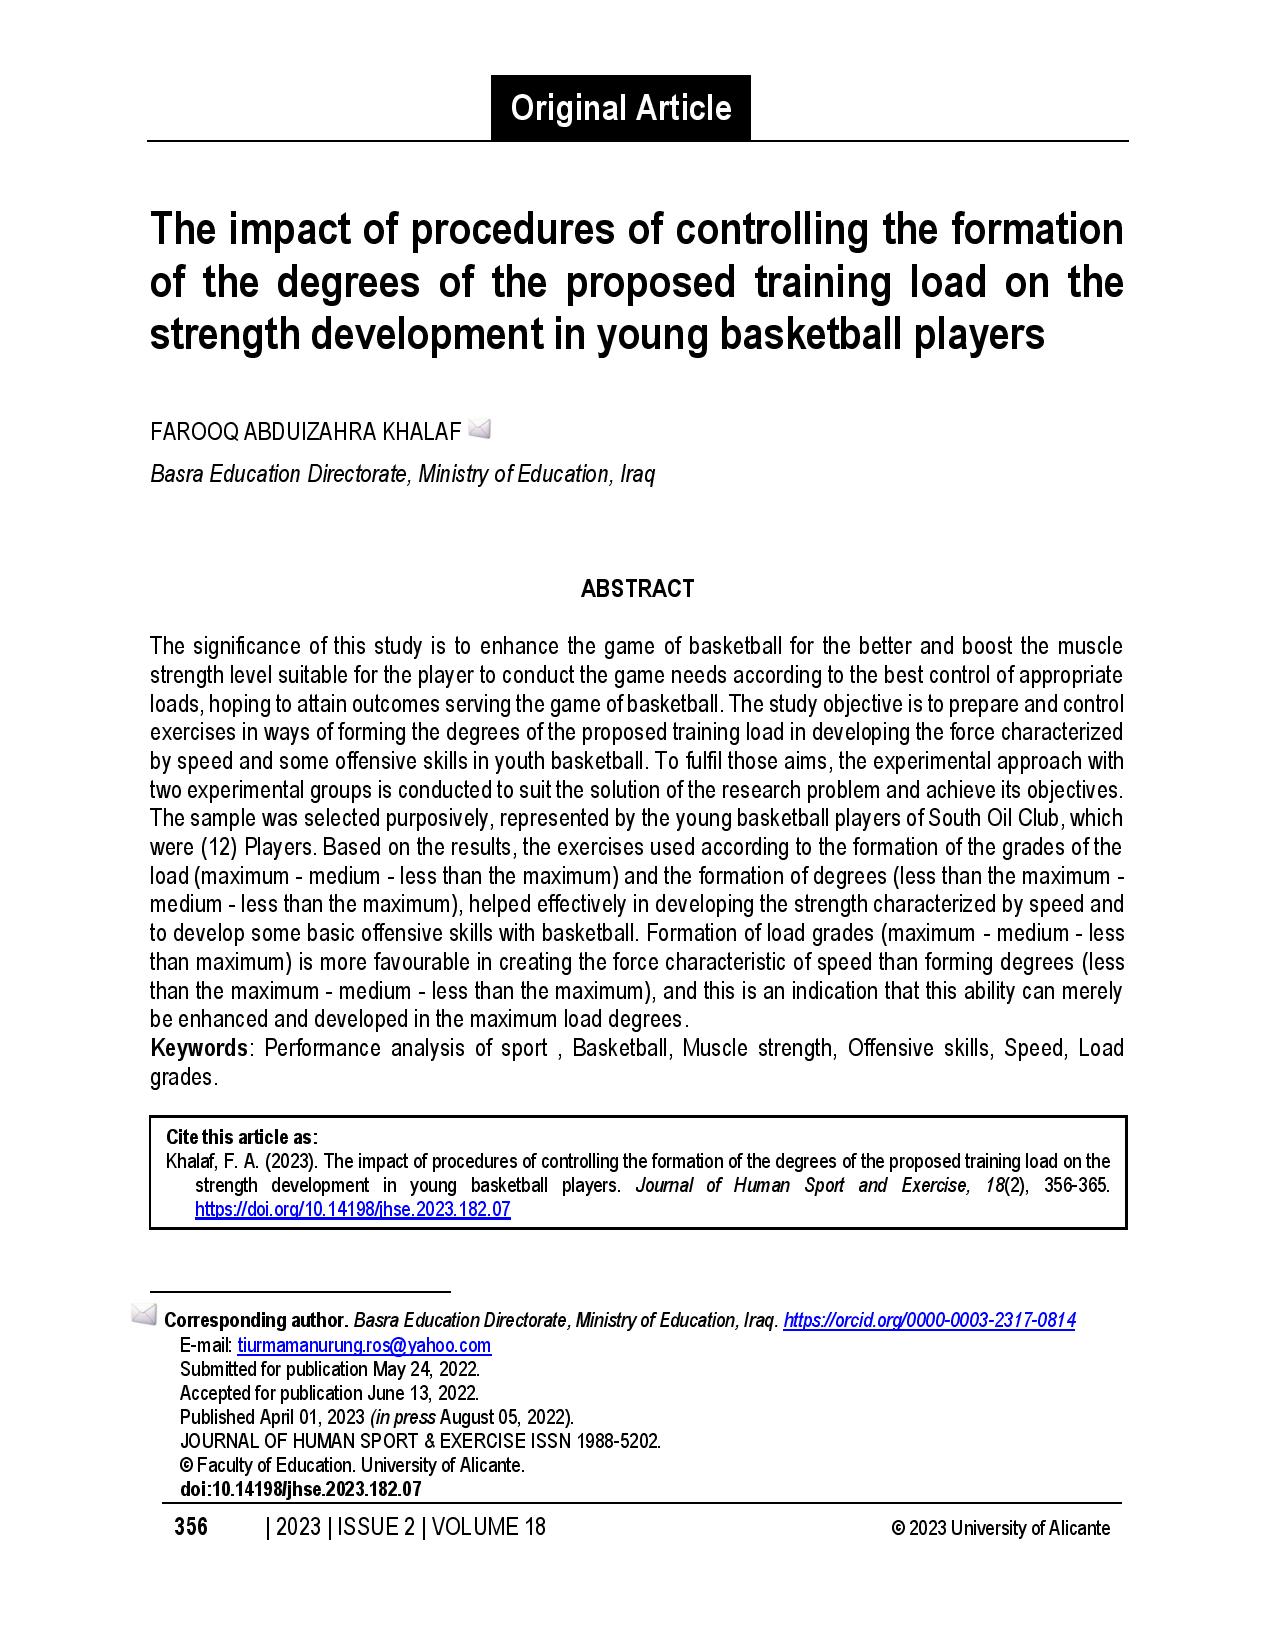 The impact of procedures of controlling the formation of the degrees of the proposed training load on the strength development in young basketball players